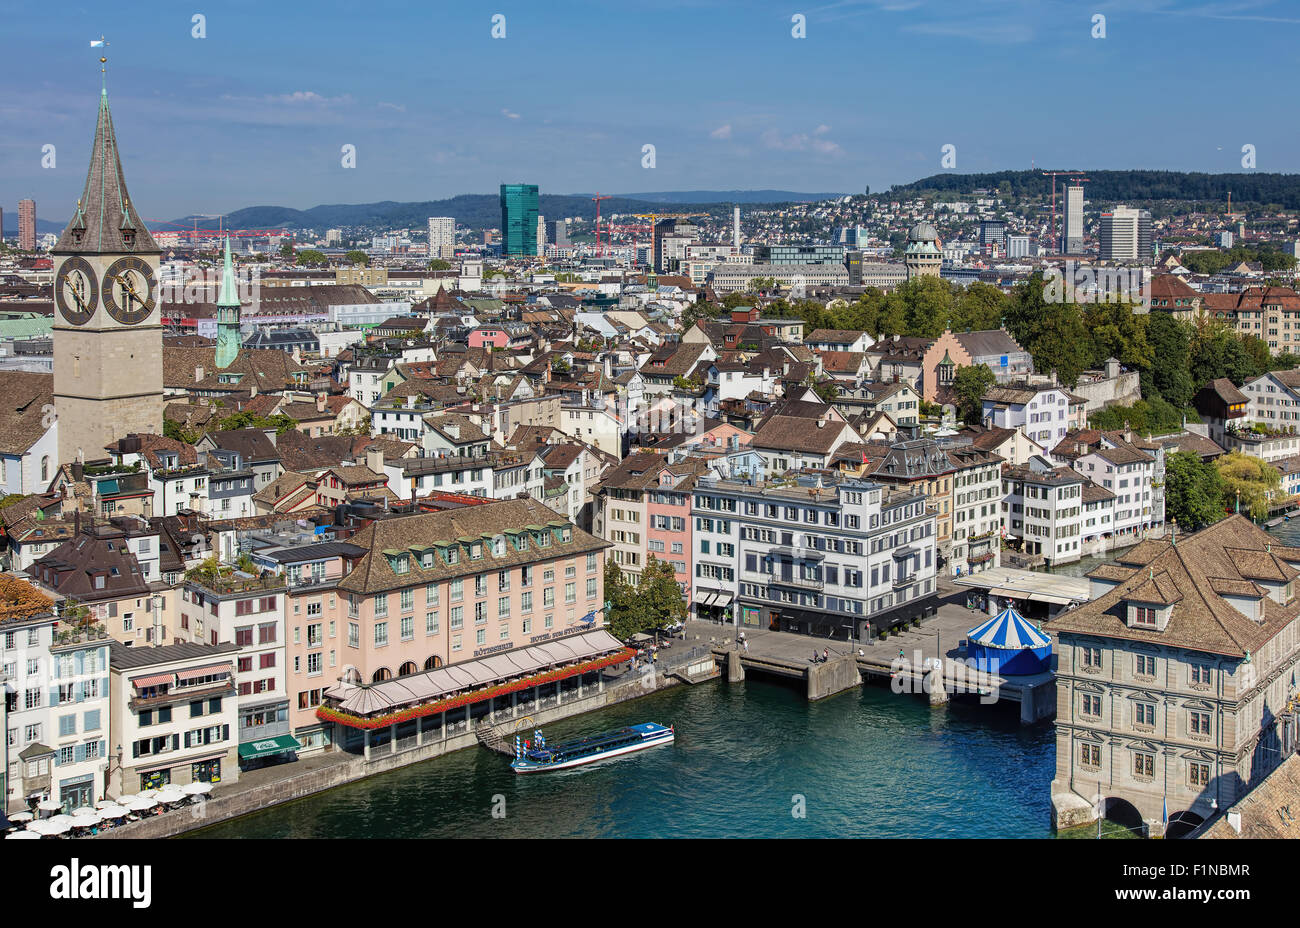 Zurich, Switzerland - 31 August, 2015: view from the tower of the Grossmunster cathedral with the 'Felix' ship at pier at the ho Stock Photo